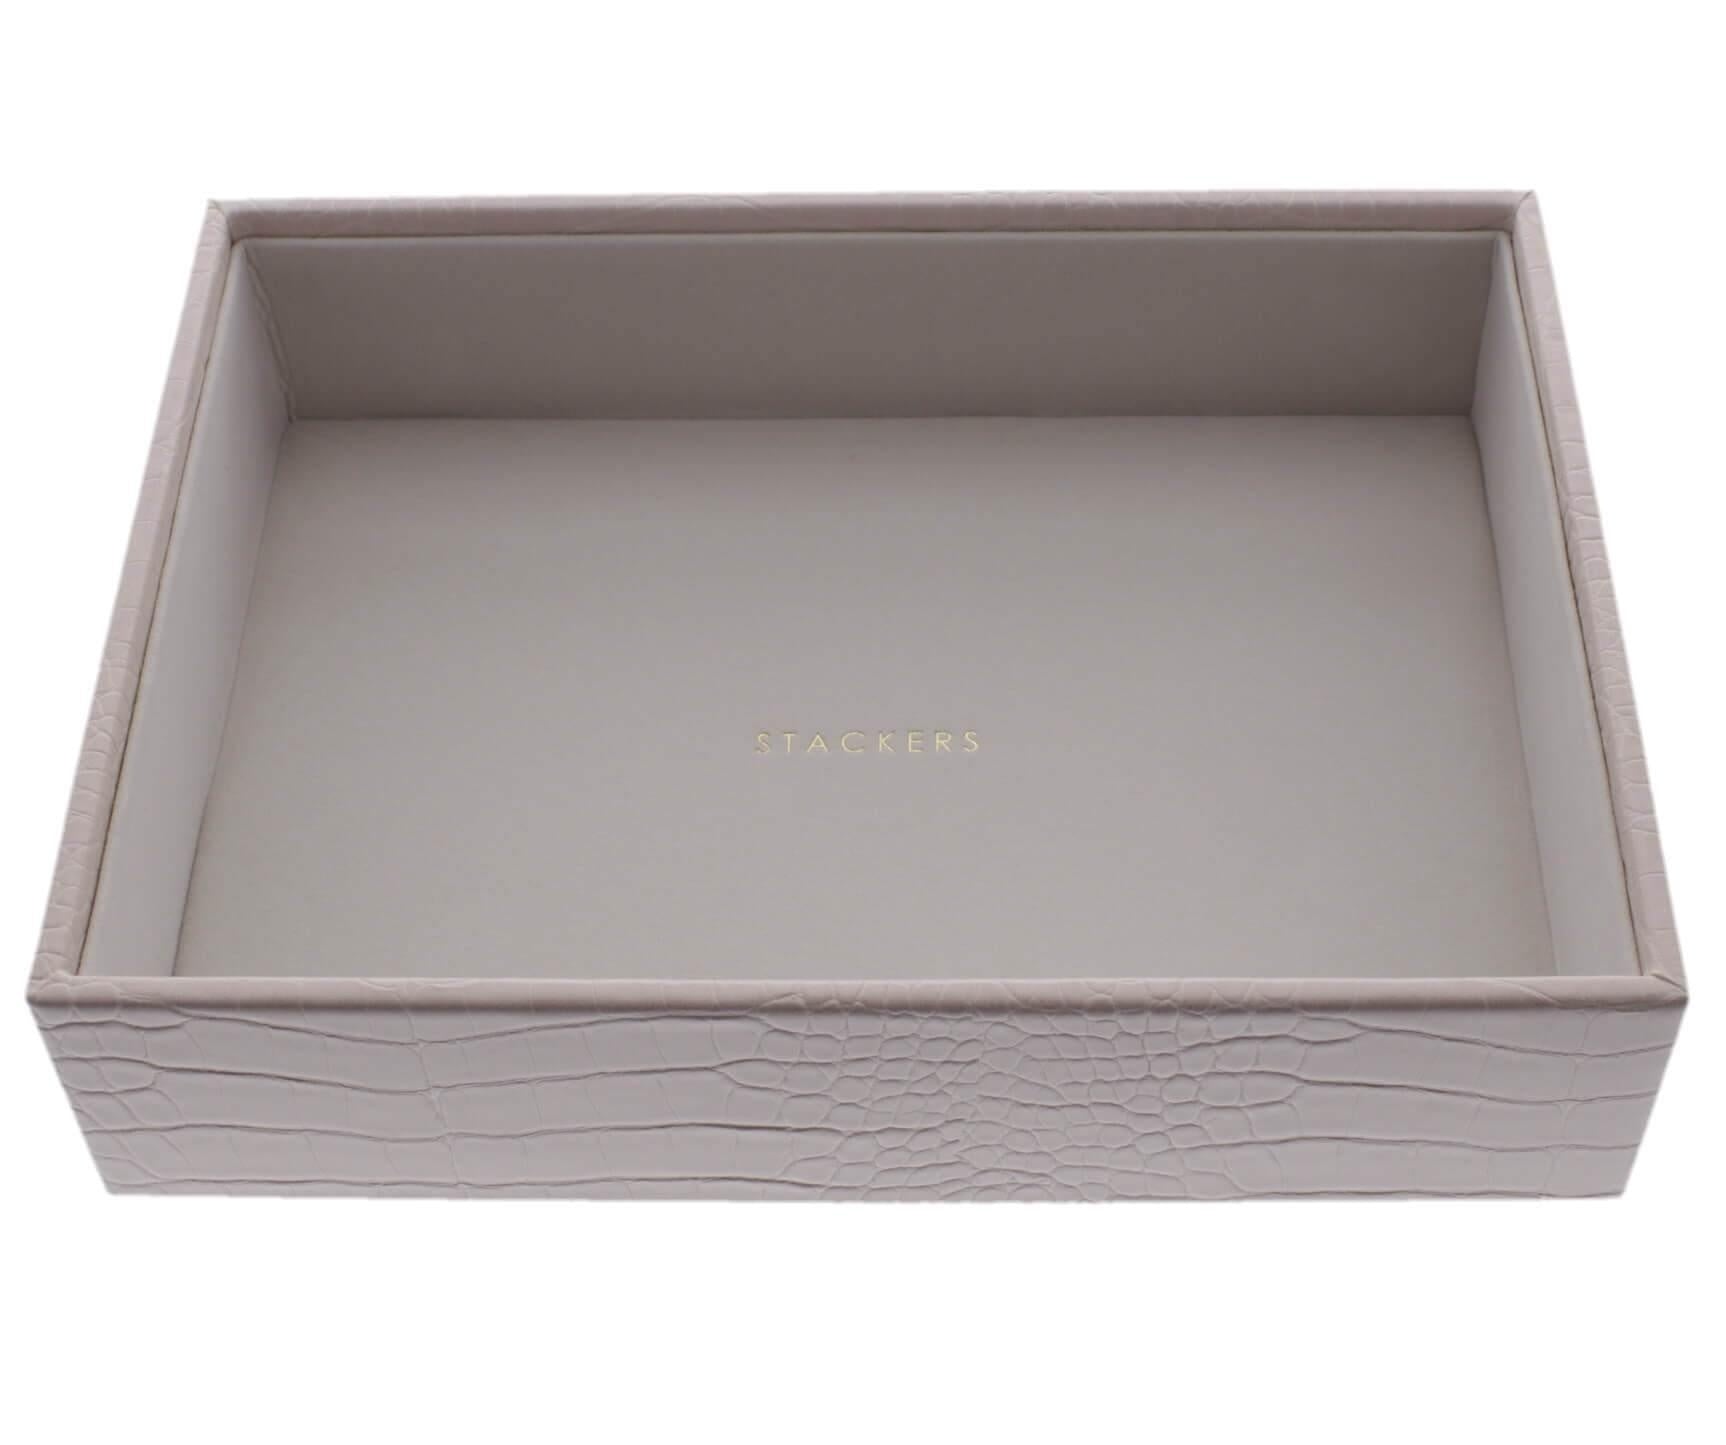 Pastel Pink Croc Classic Size Stackers Jewellery Box Deep compartment tray